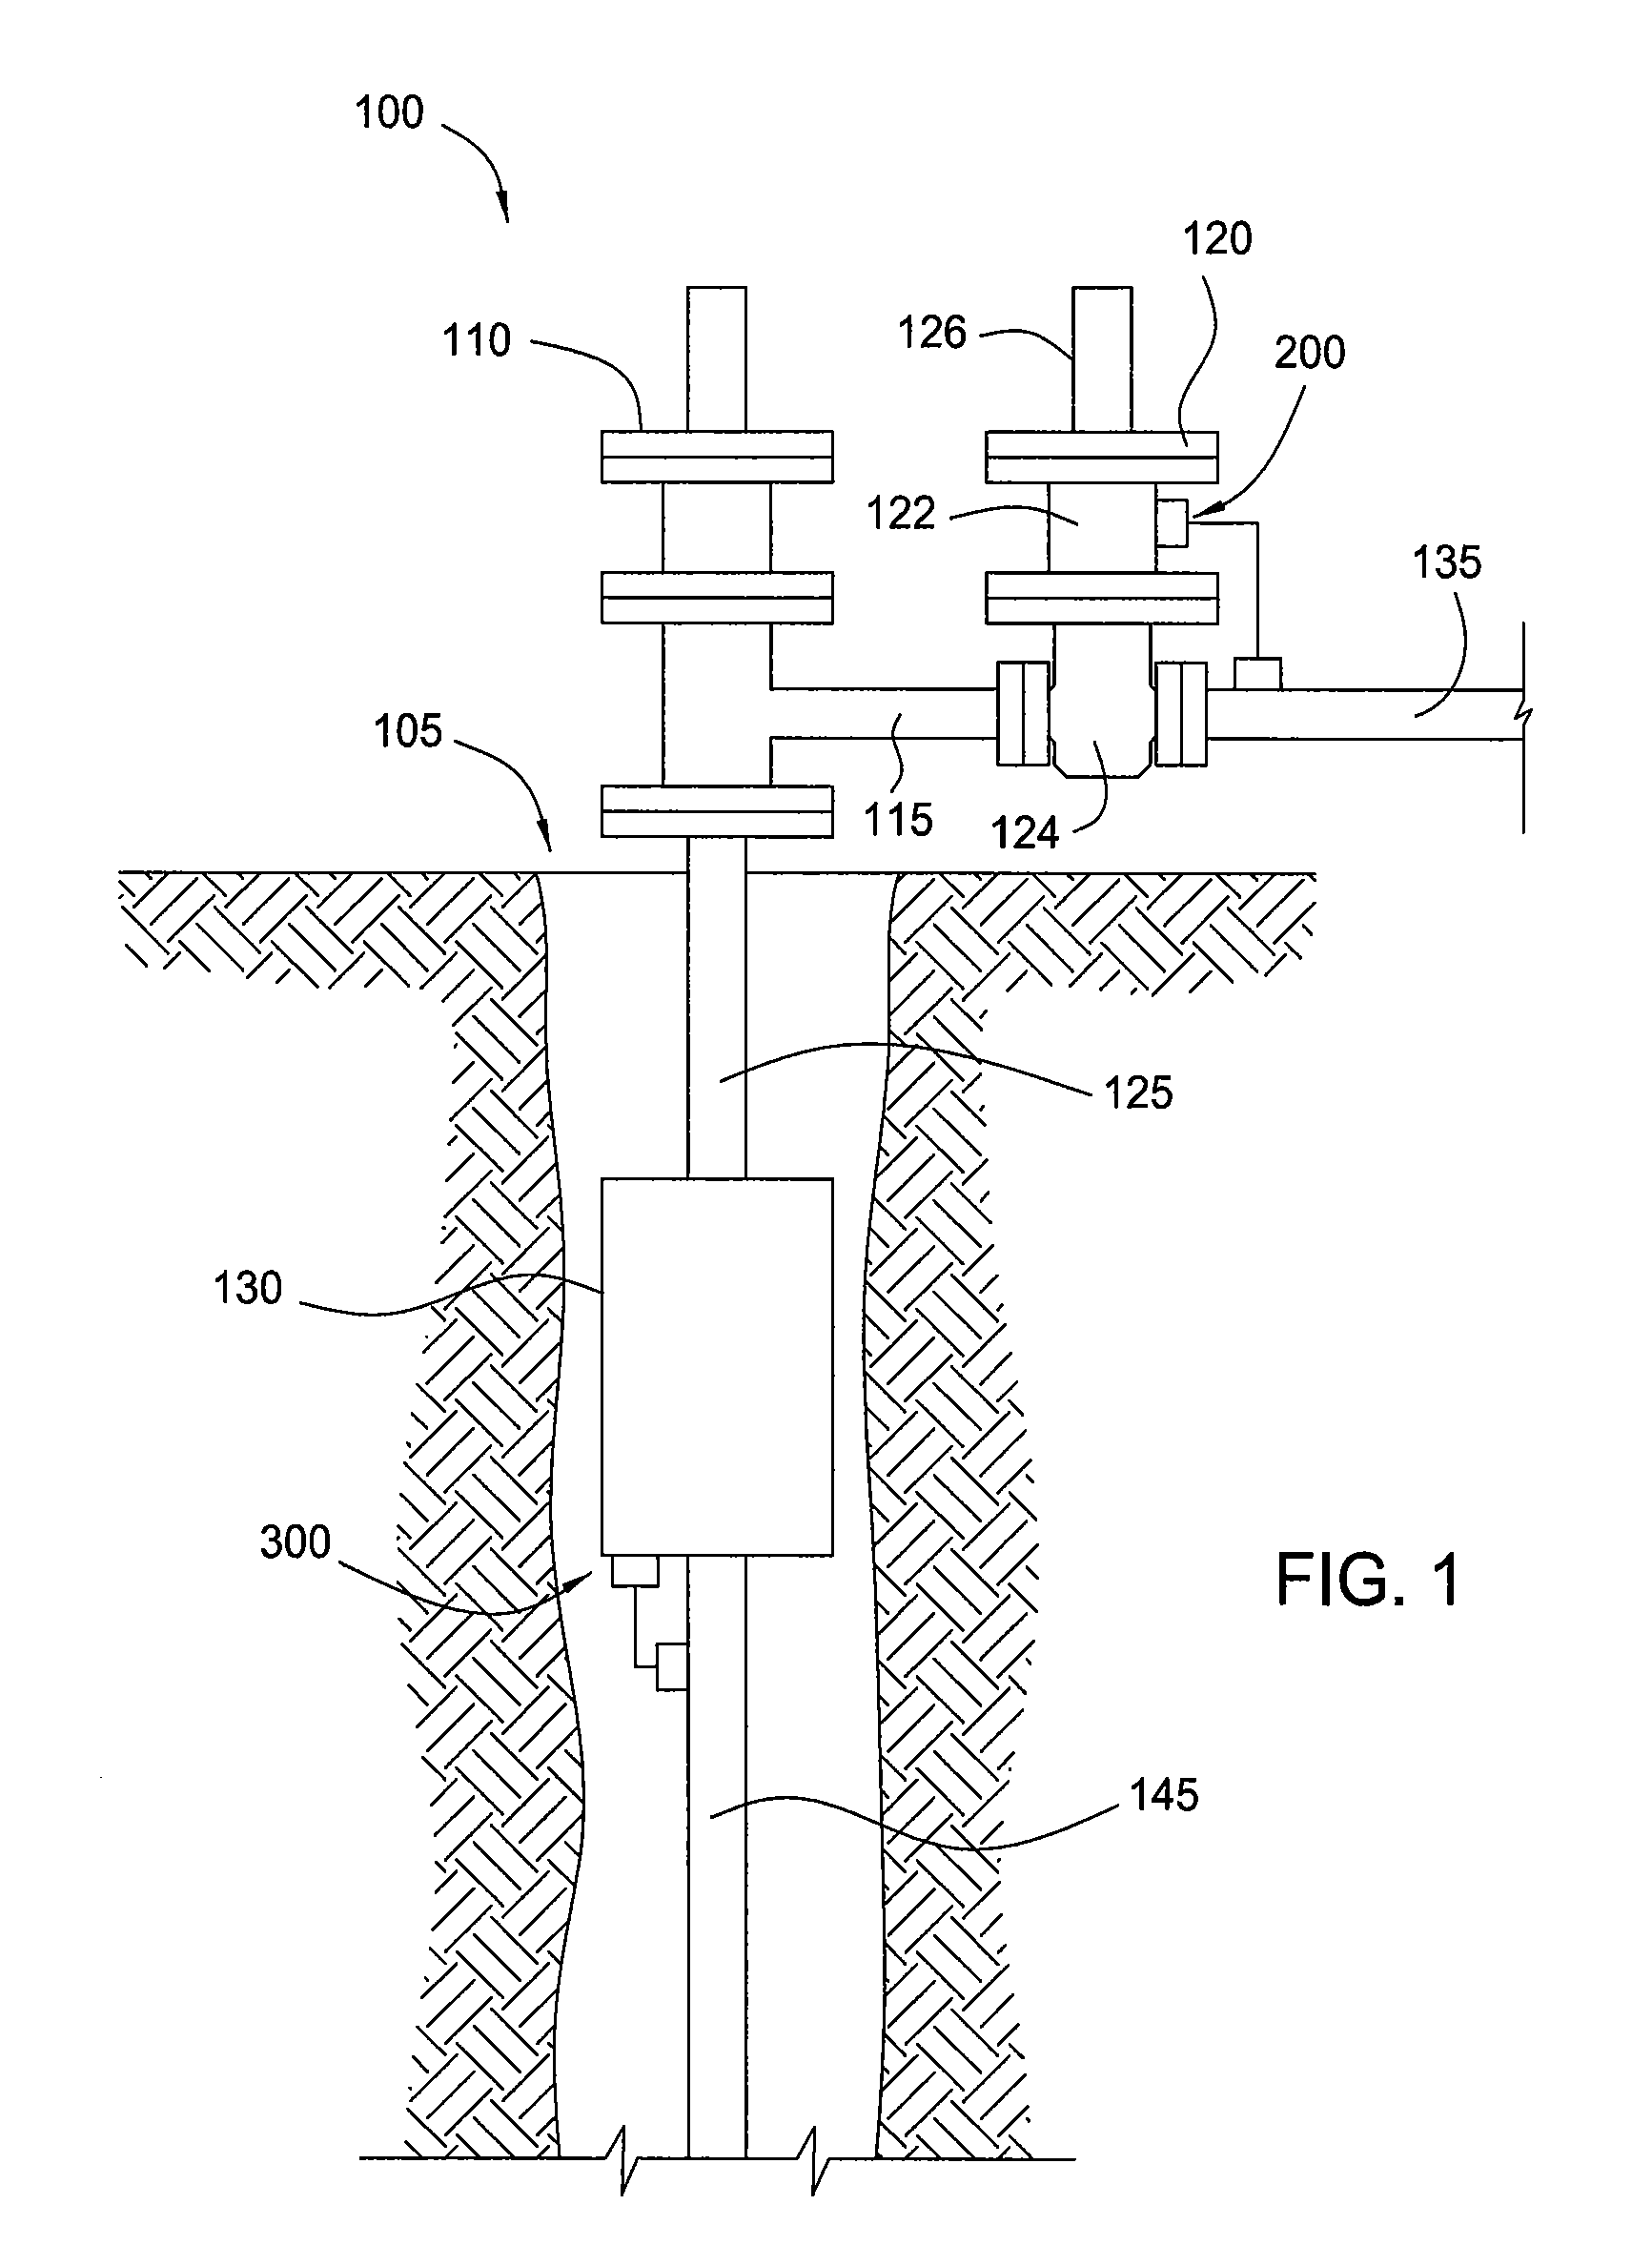 Safety valve control system and method of use